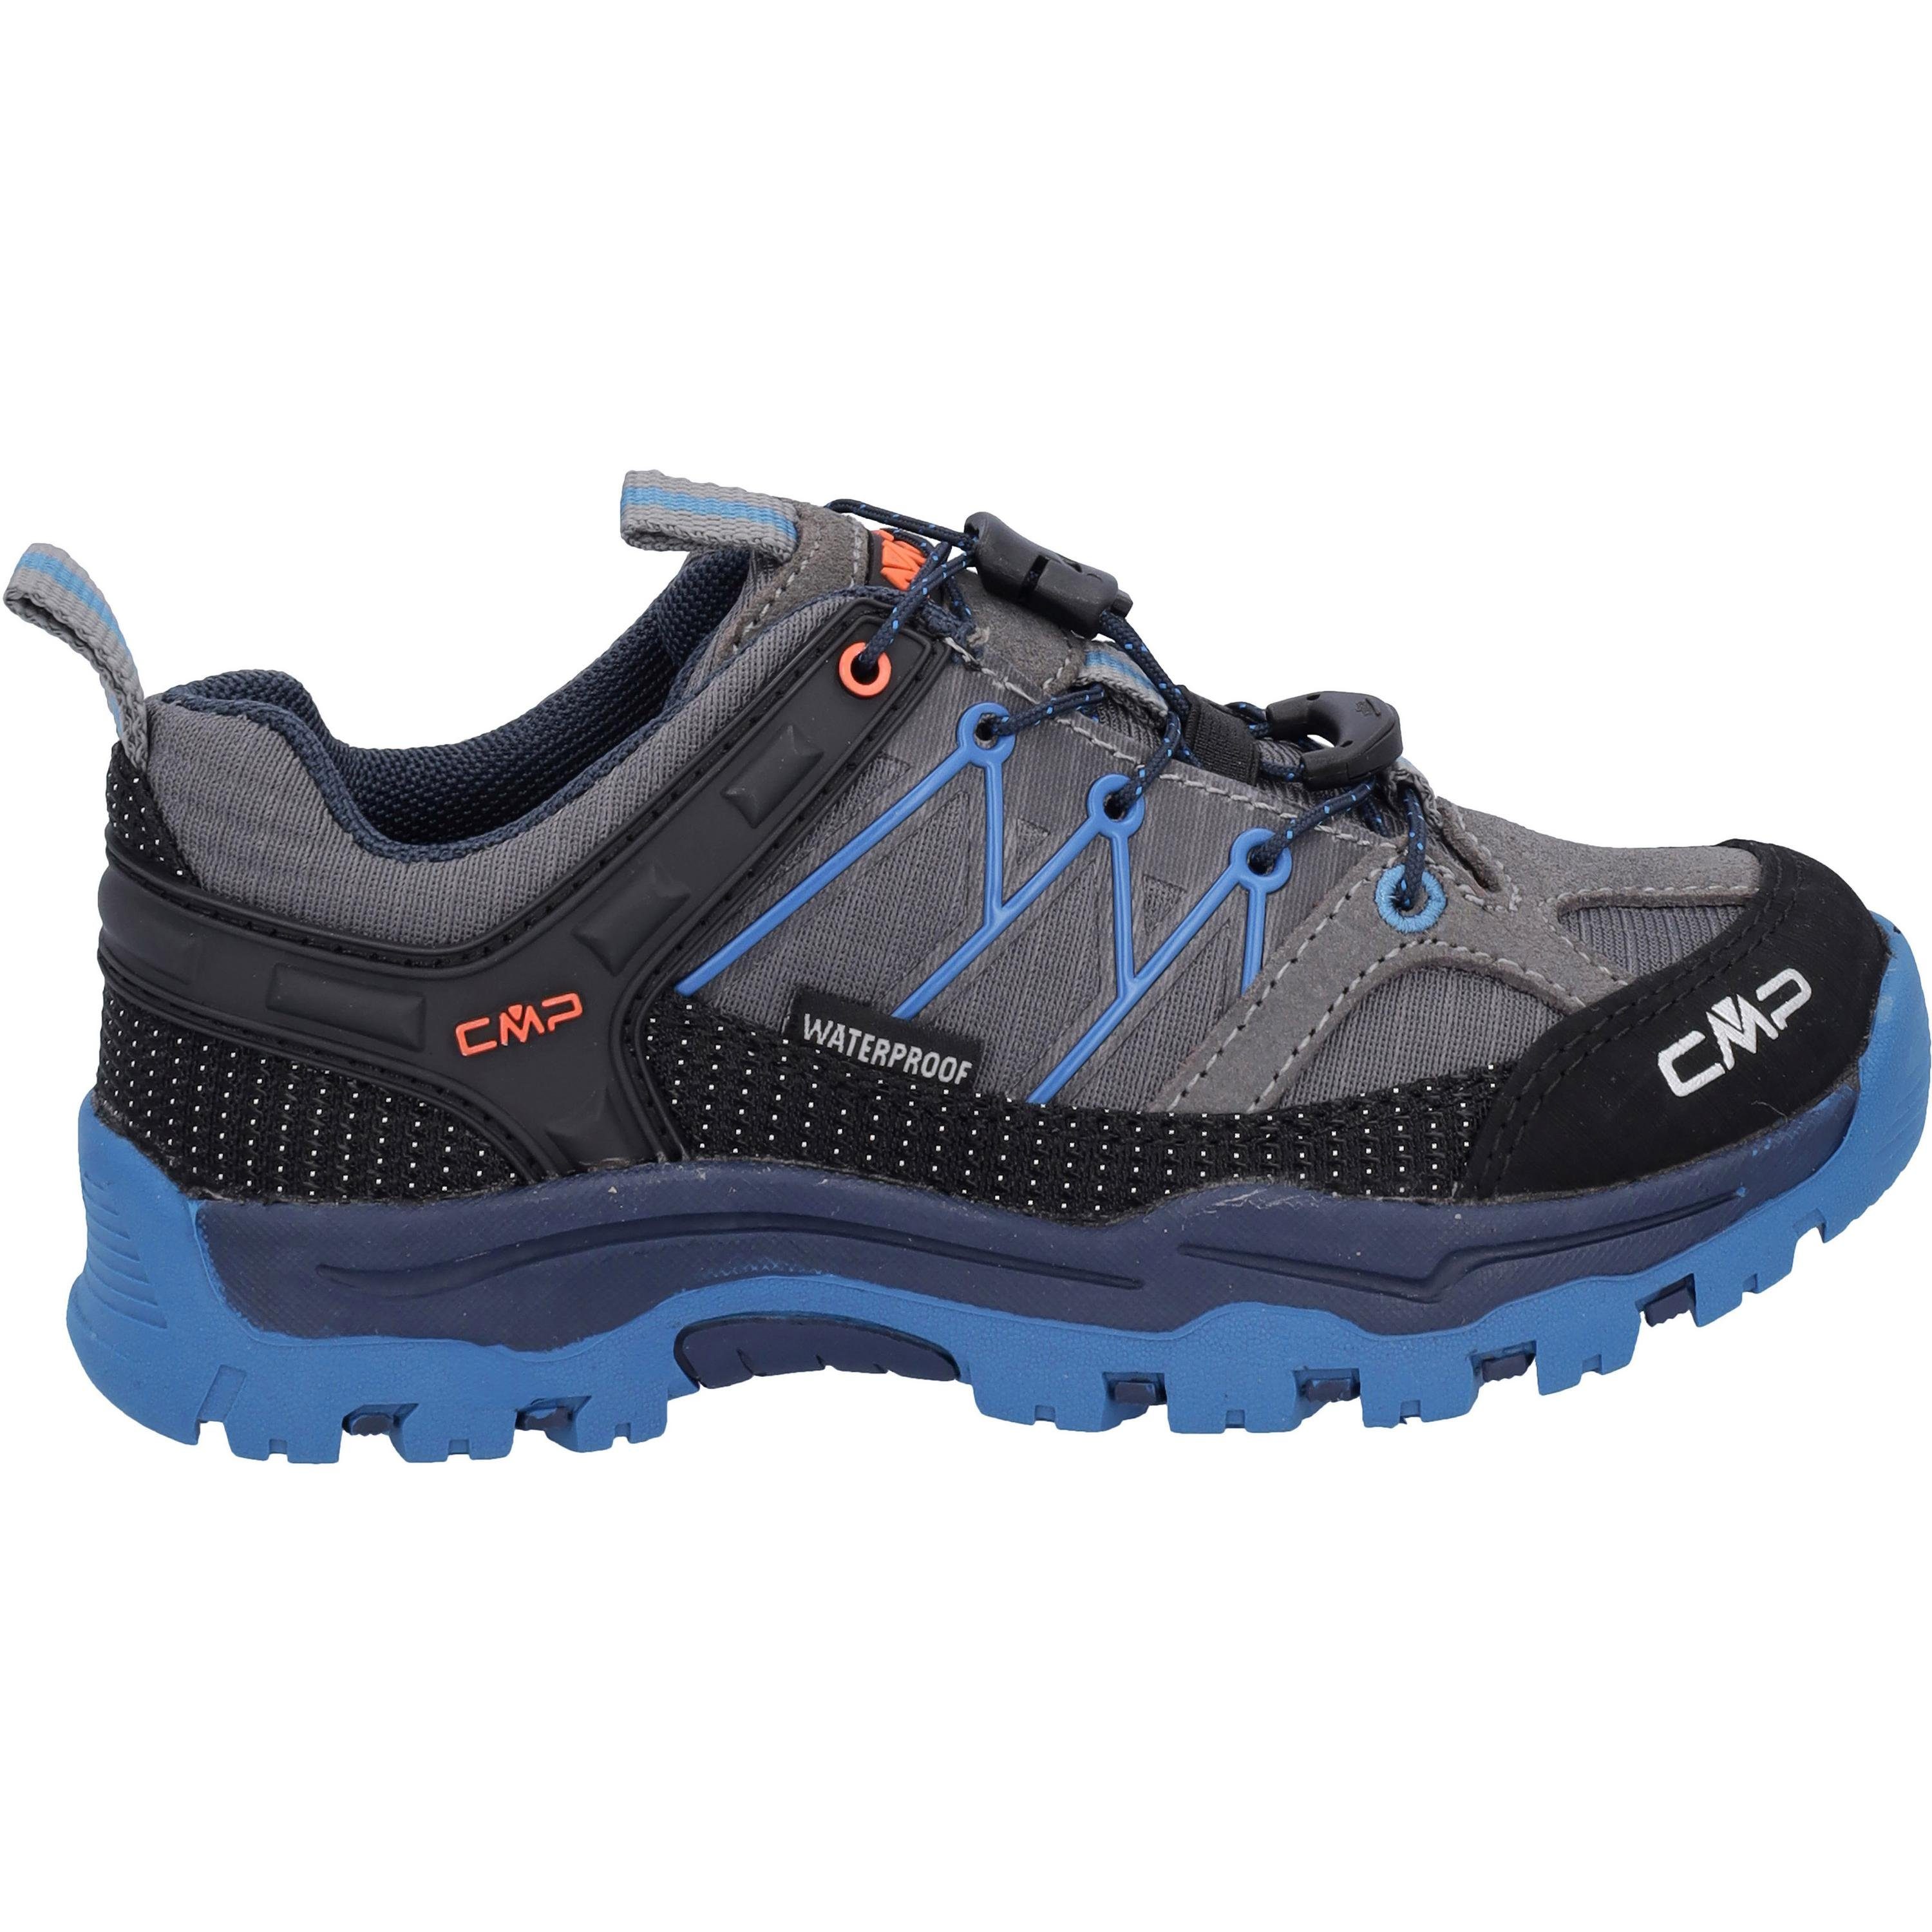 CMP Rigel Low WP Outdoorschuh graffite-oltremare